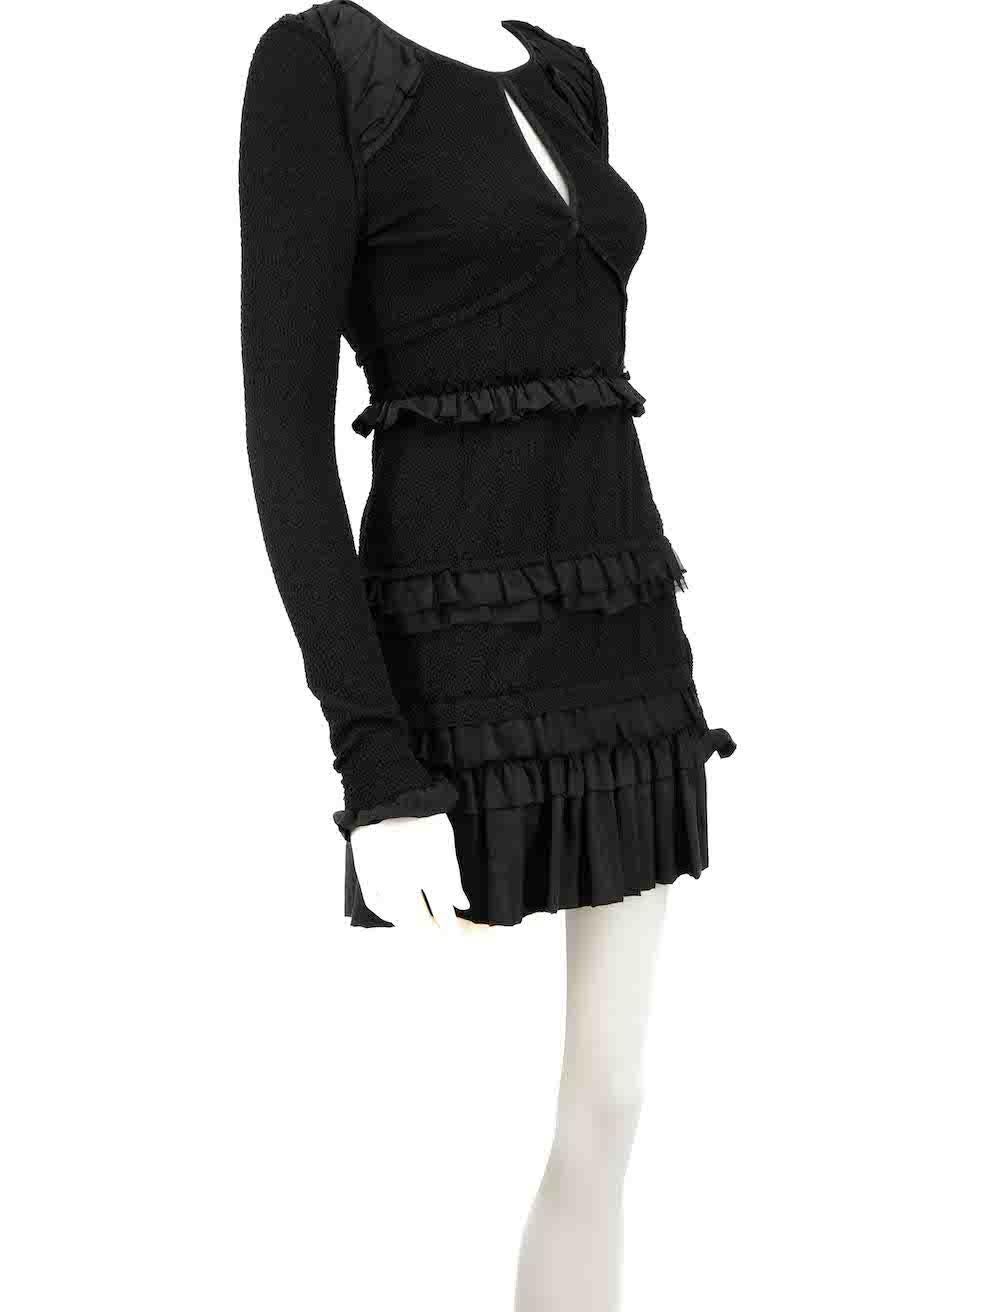 CONDITION is Very good. Minimal wear to dress is evident. Minimal fraying threads to ruffle edges on this used Nina Ricci designer resale item.
 
 
 
 Details
 
 
 Black
 
 Synthetic
 
 Dress
 
 Long sleeves
 
 Mini
 
 Front keyhole detail
 
 Ruffle